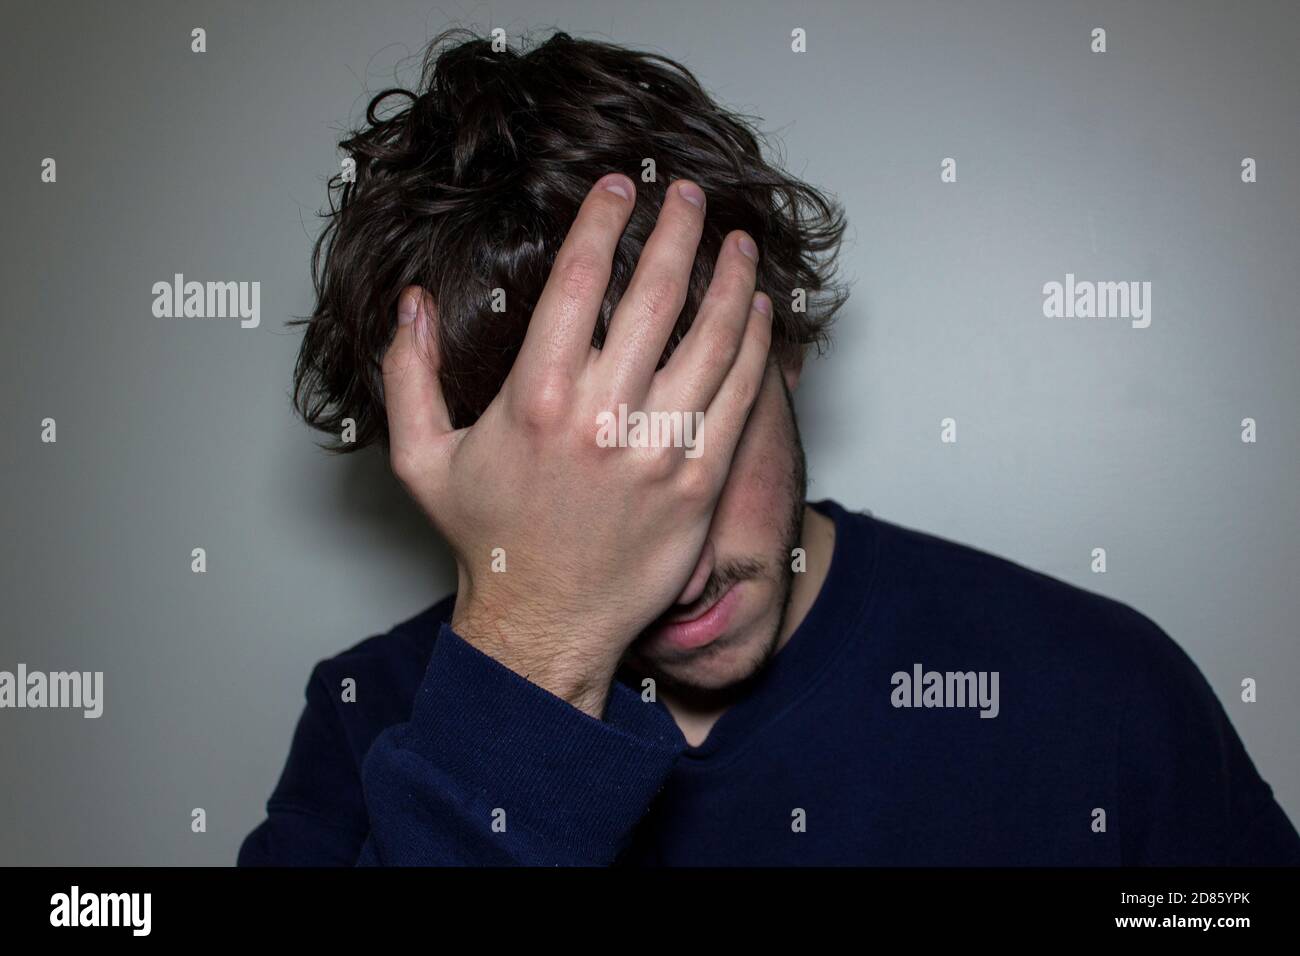 Person with Hand on Face in Disbelief Stock Photo